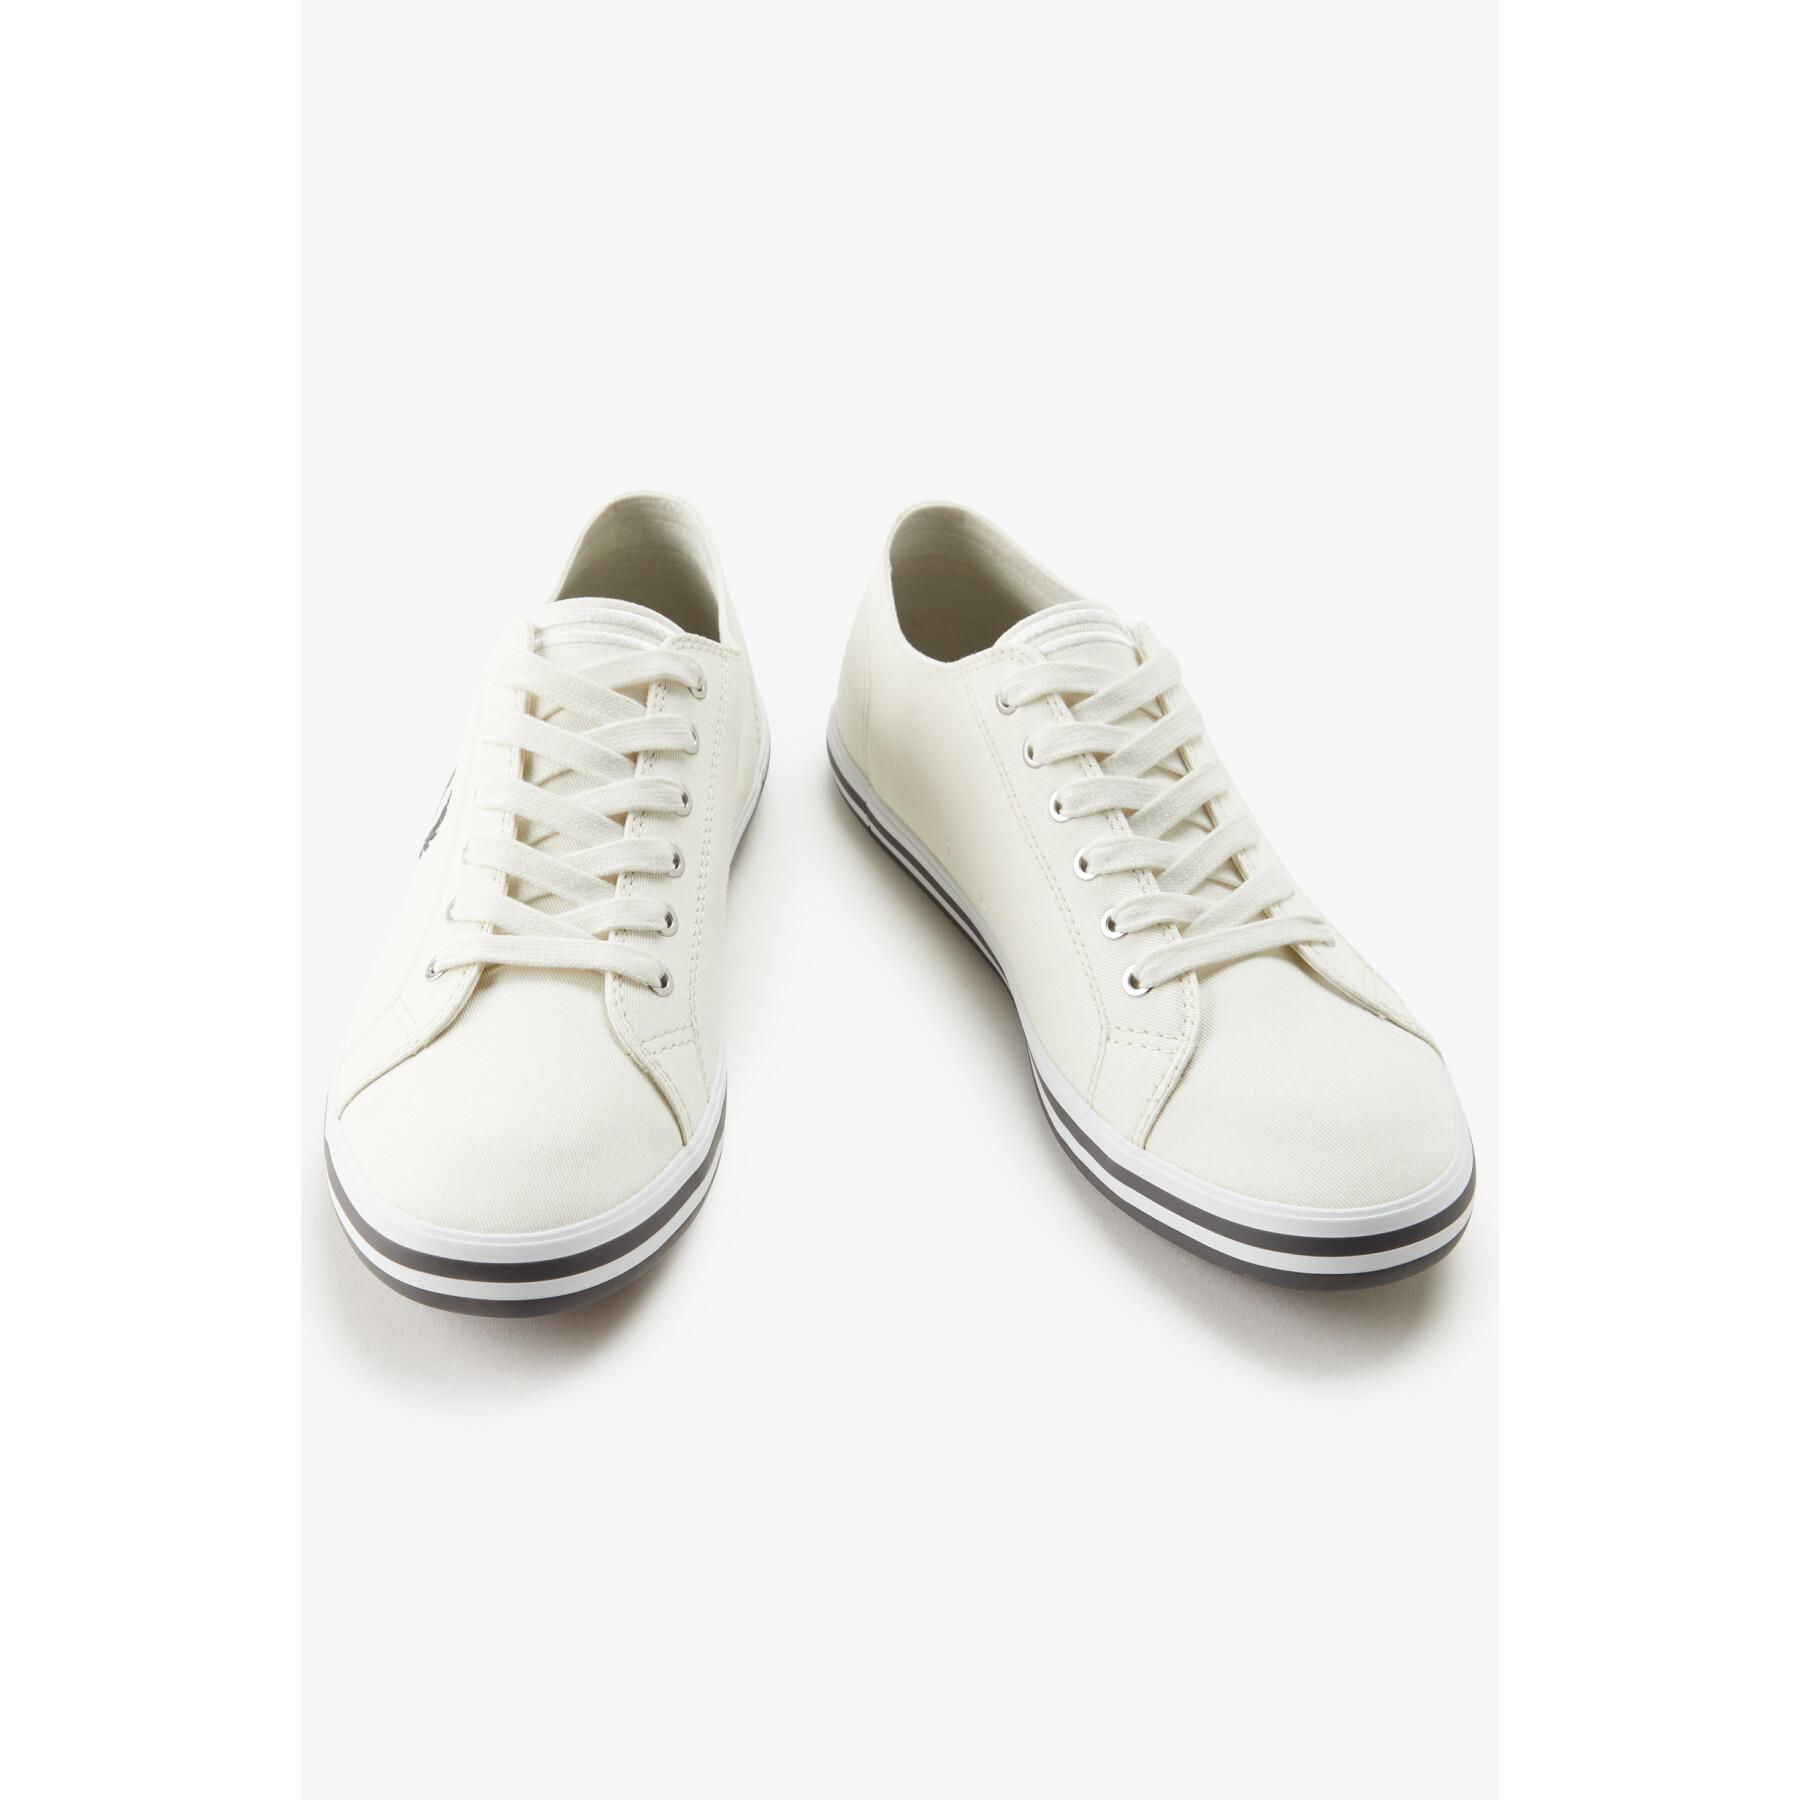 Baskets Fred Perry Kingston